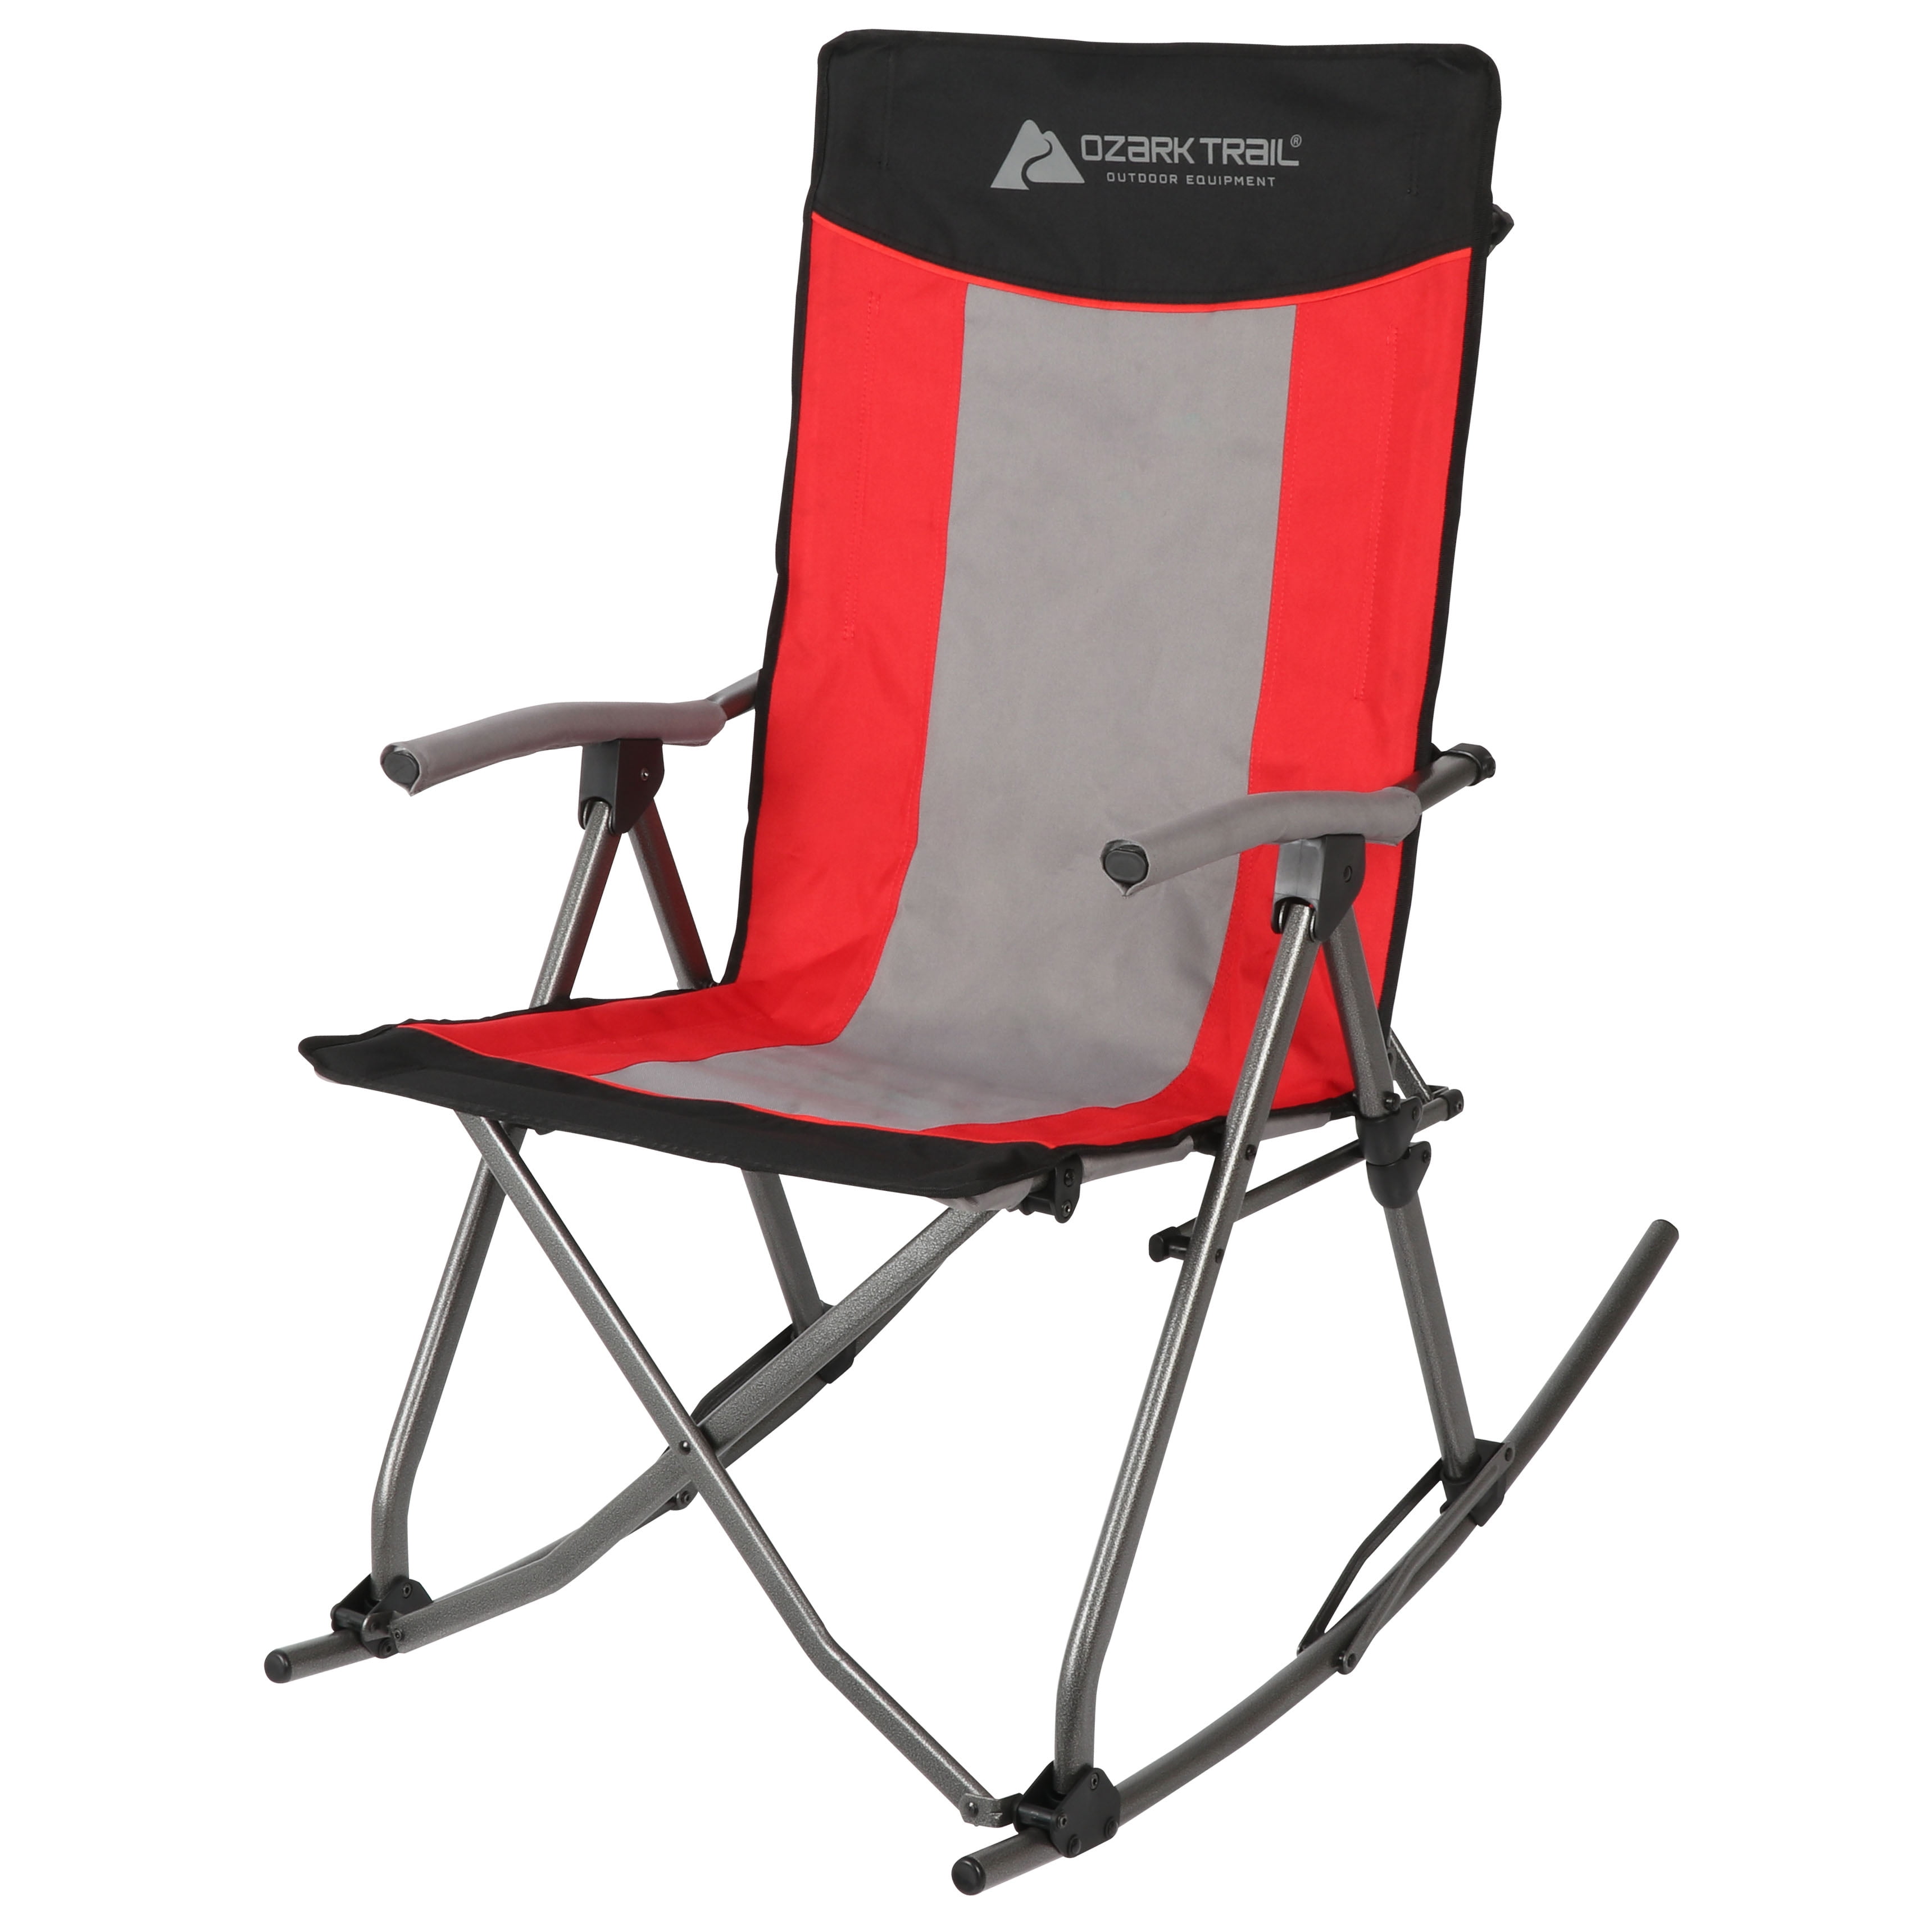 Ozark Trail Arm Rest Rocking Outdoor Camp Chair, Red